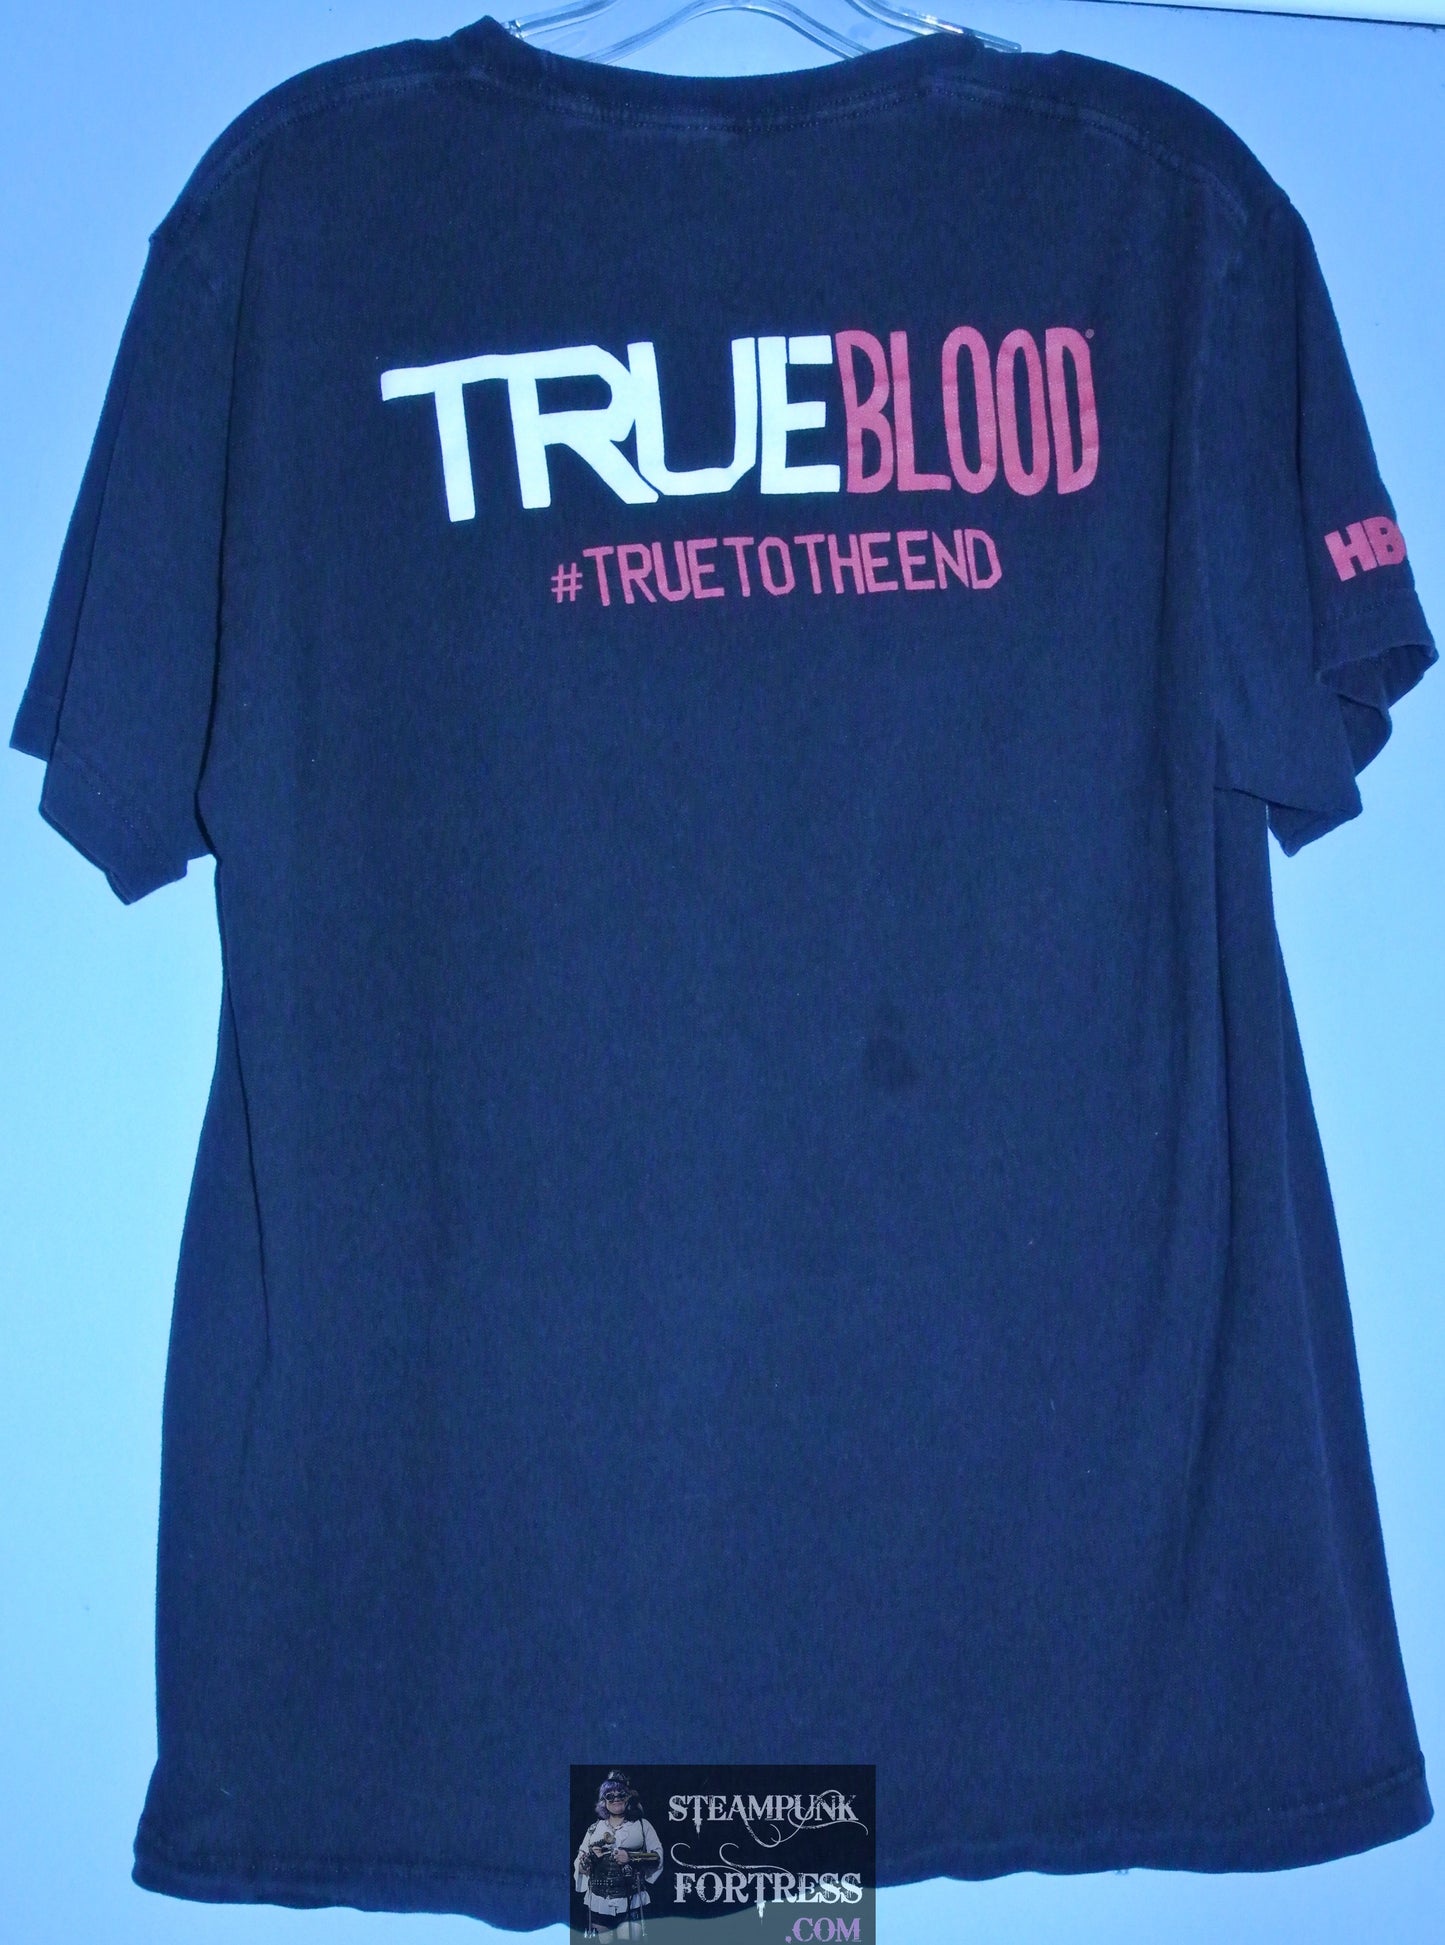 TRUE BLOOD TRUBIE T SHIRT BLACK LARGE SDCC COMIC CON PANEL GIFT HBO VERY GOOD